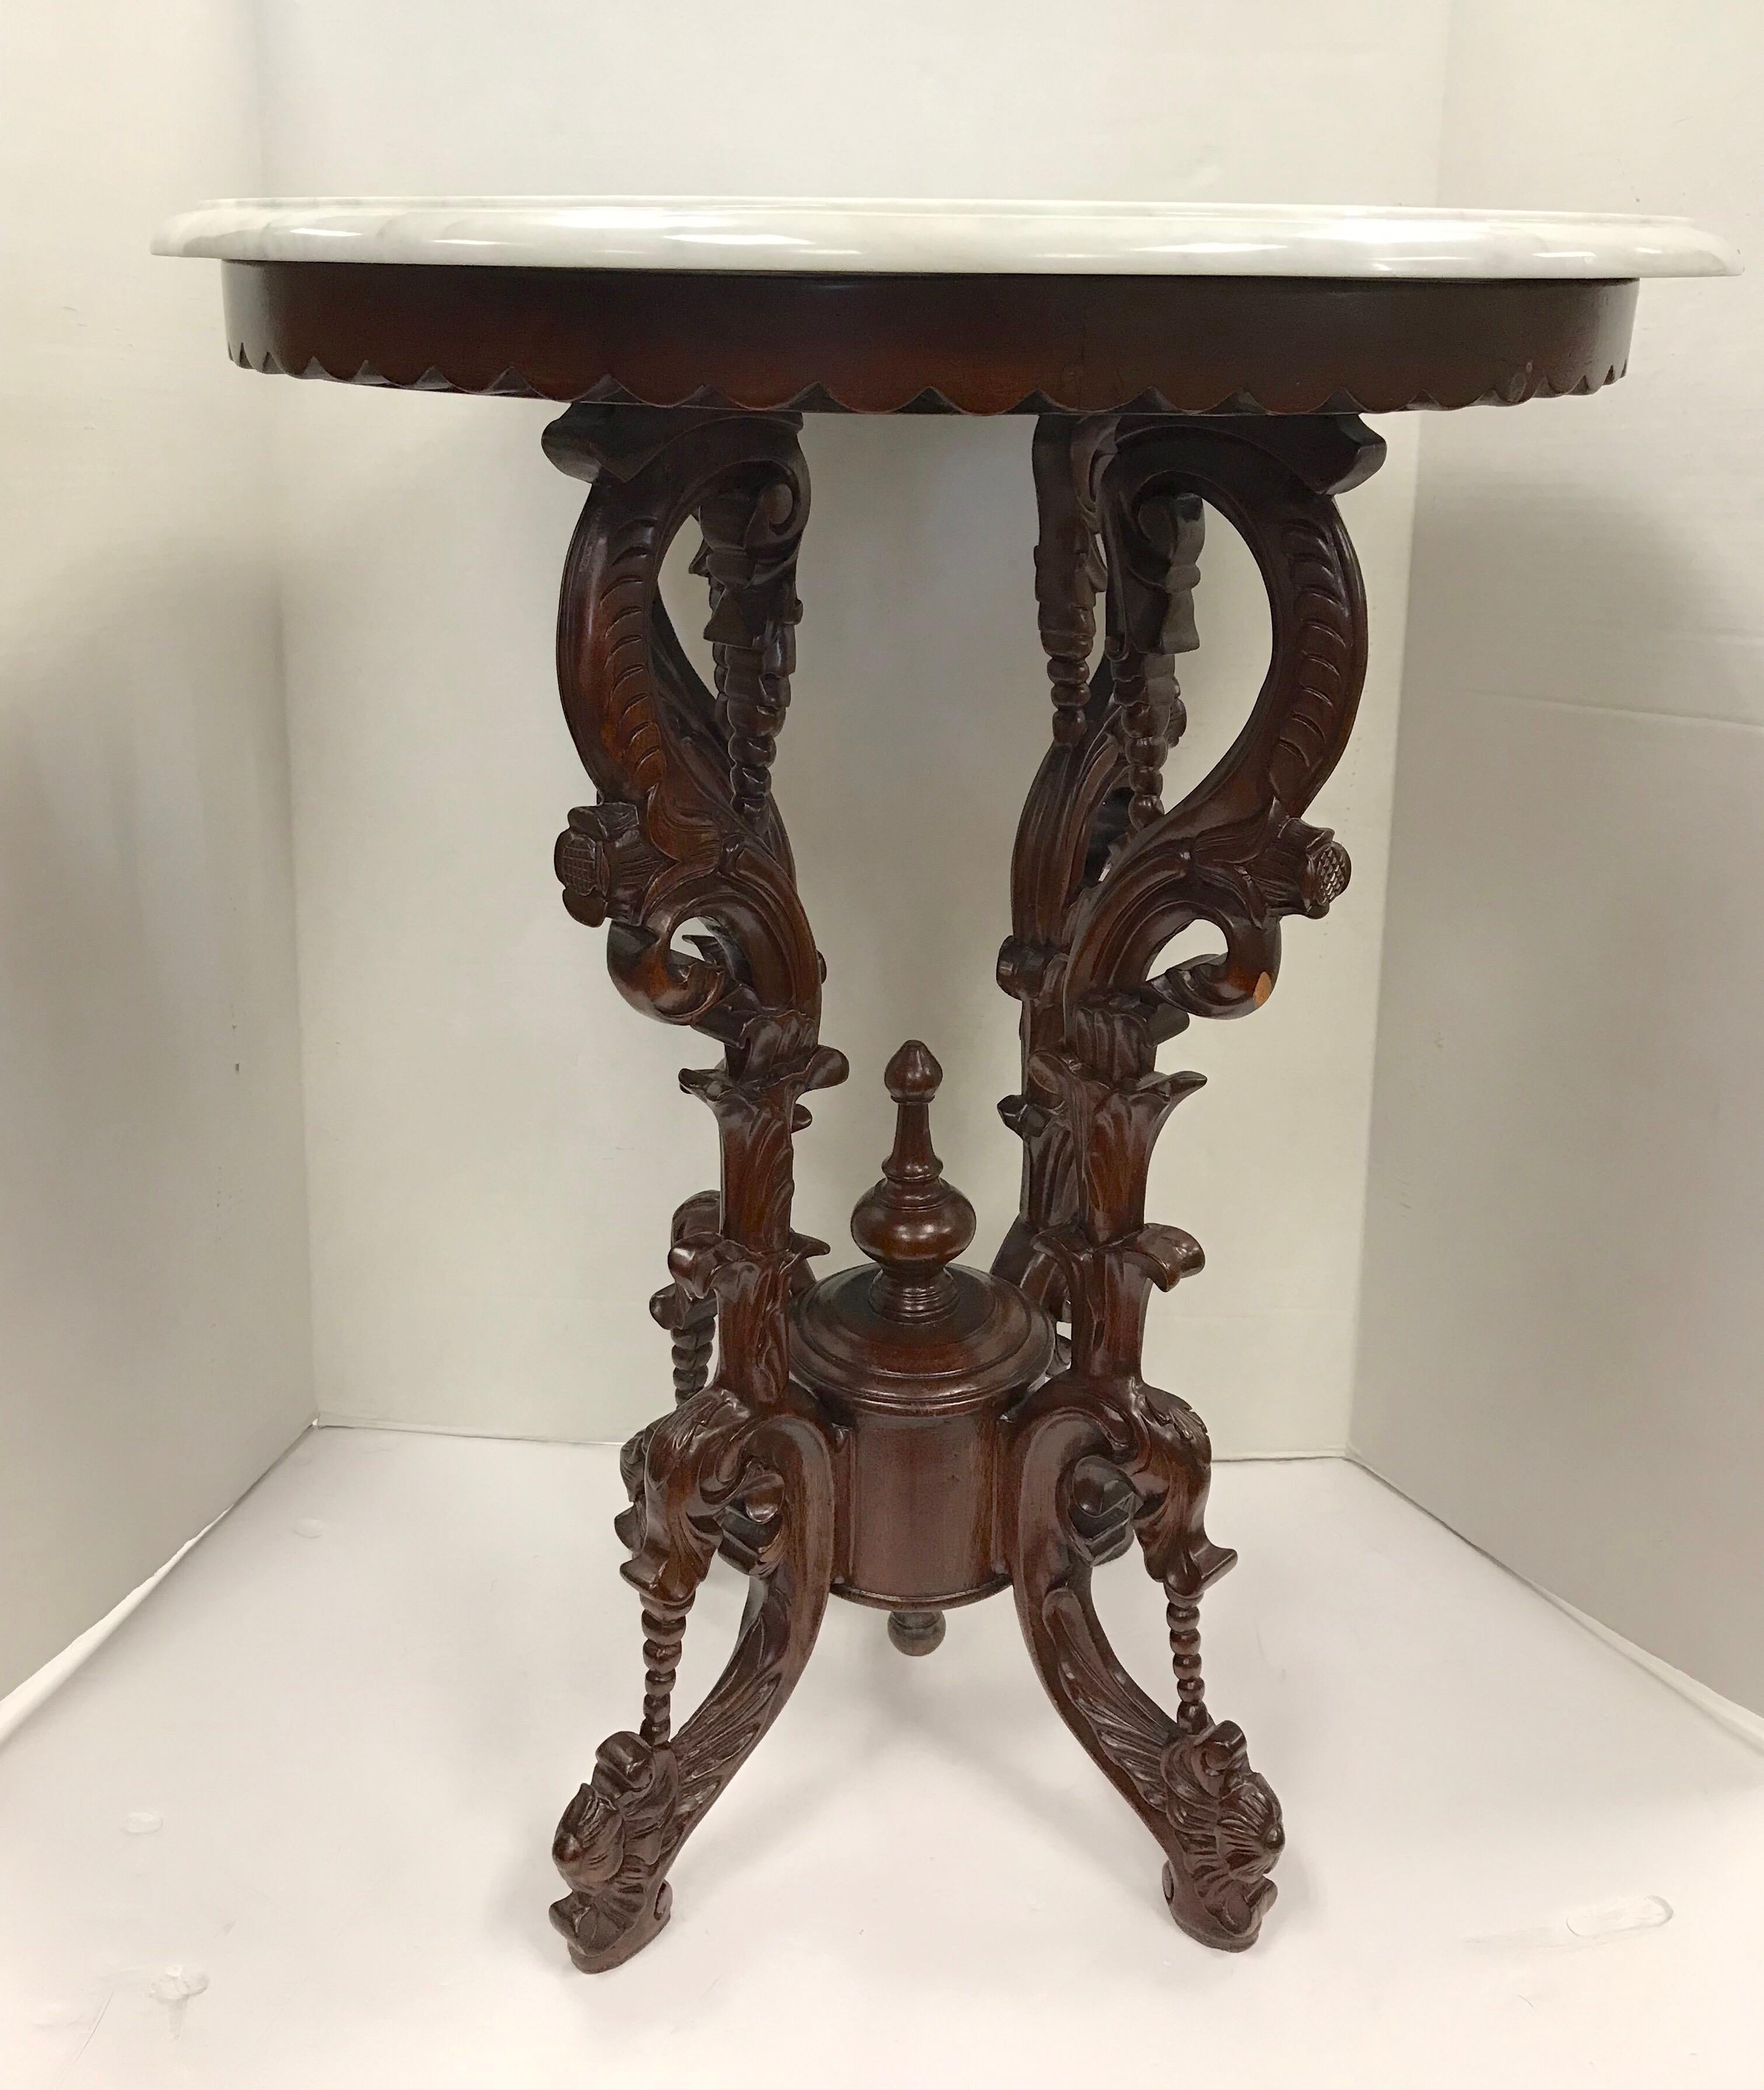 Elegant intricately carved mahogany round table with marble top.